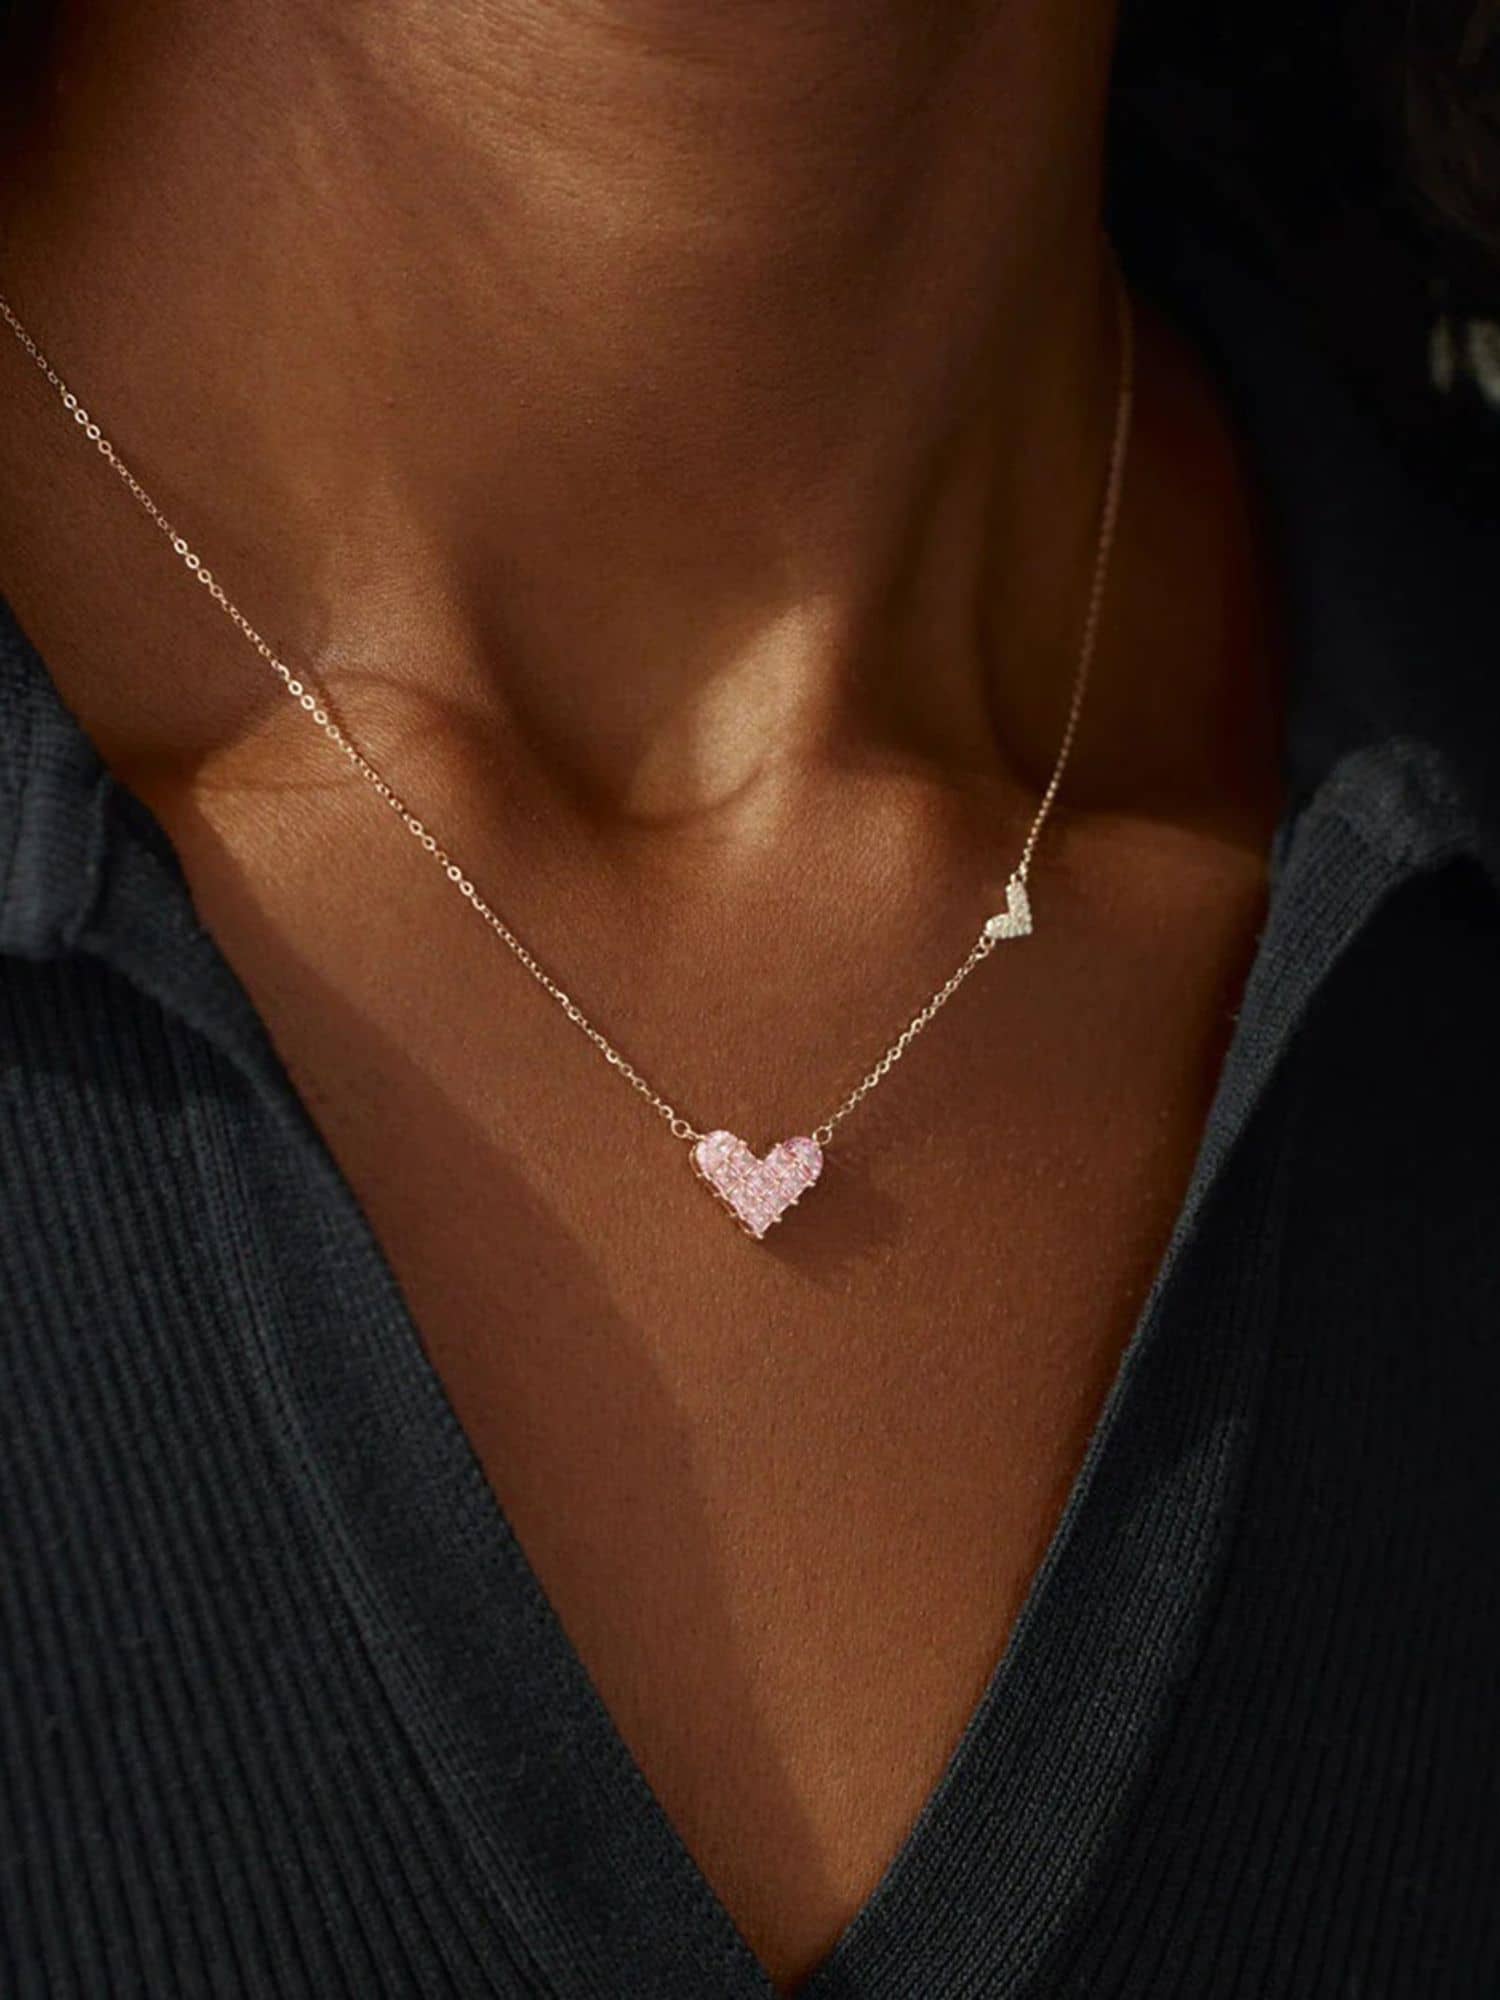 rose gold heart pendant necklace